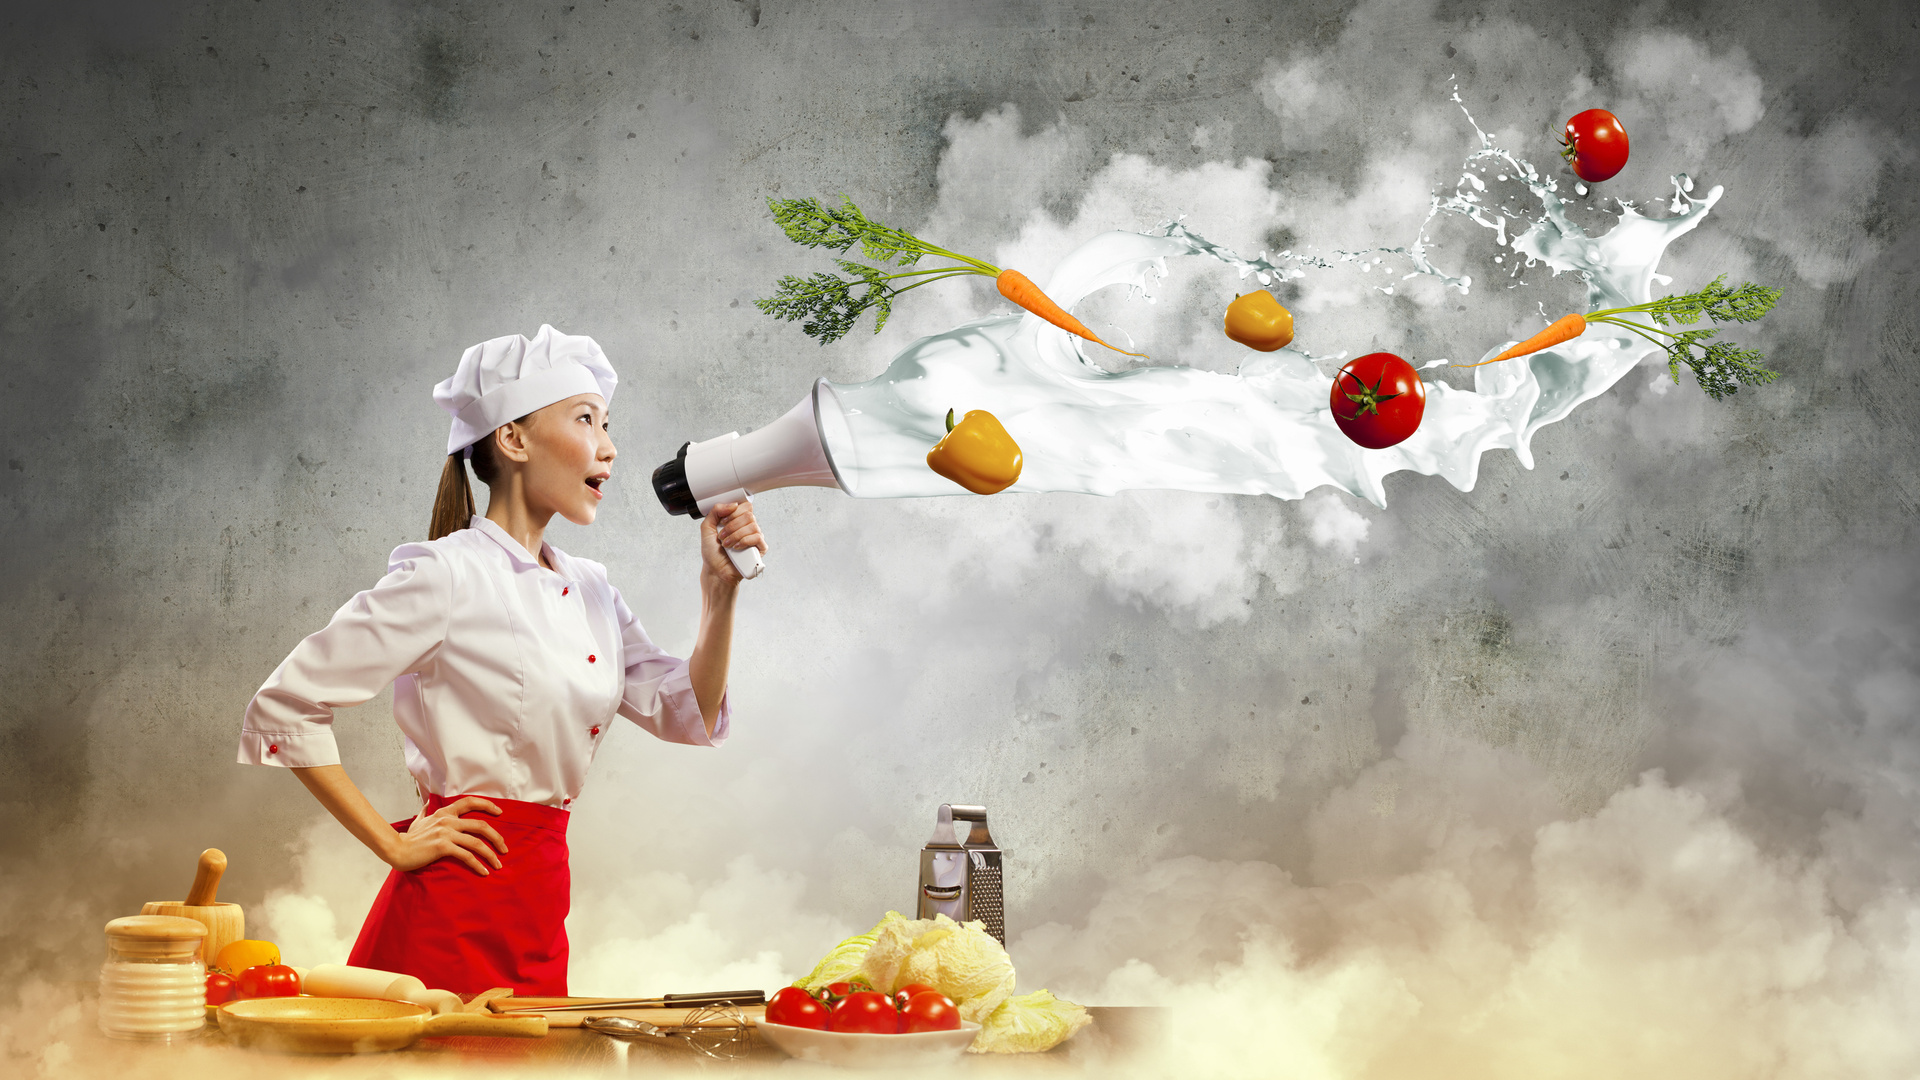 Backgrounds-HD-Cooking-Download.jpg